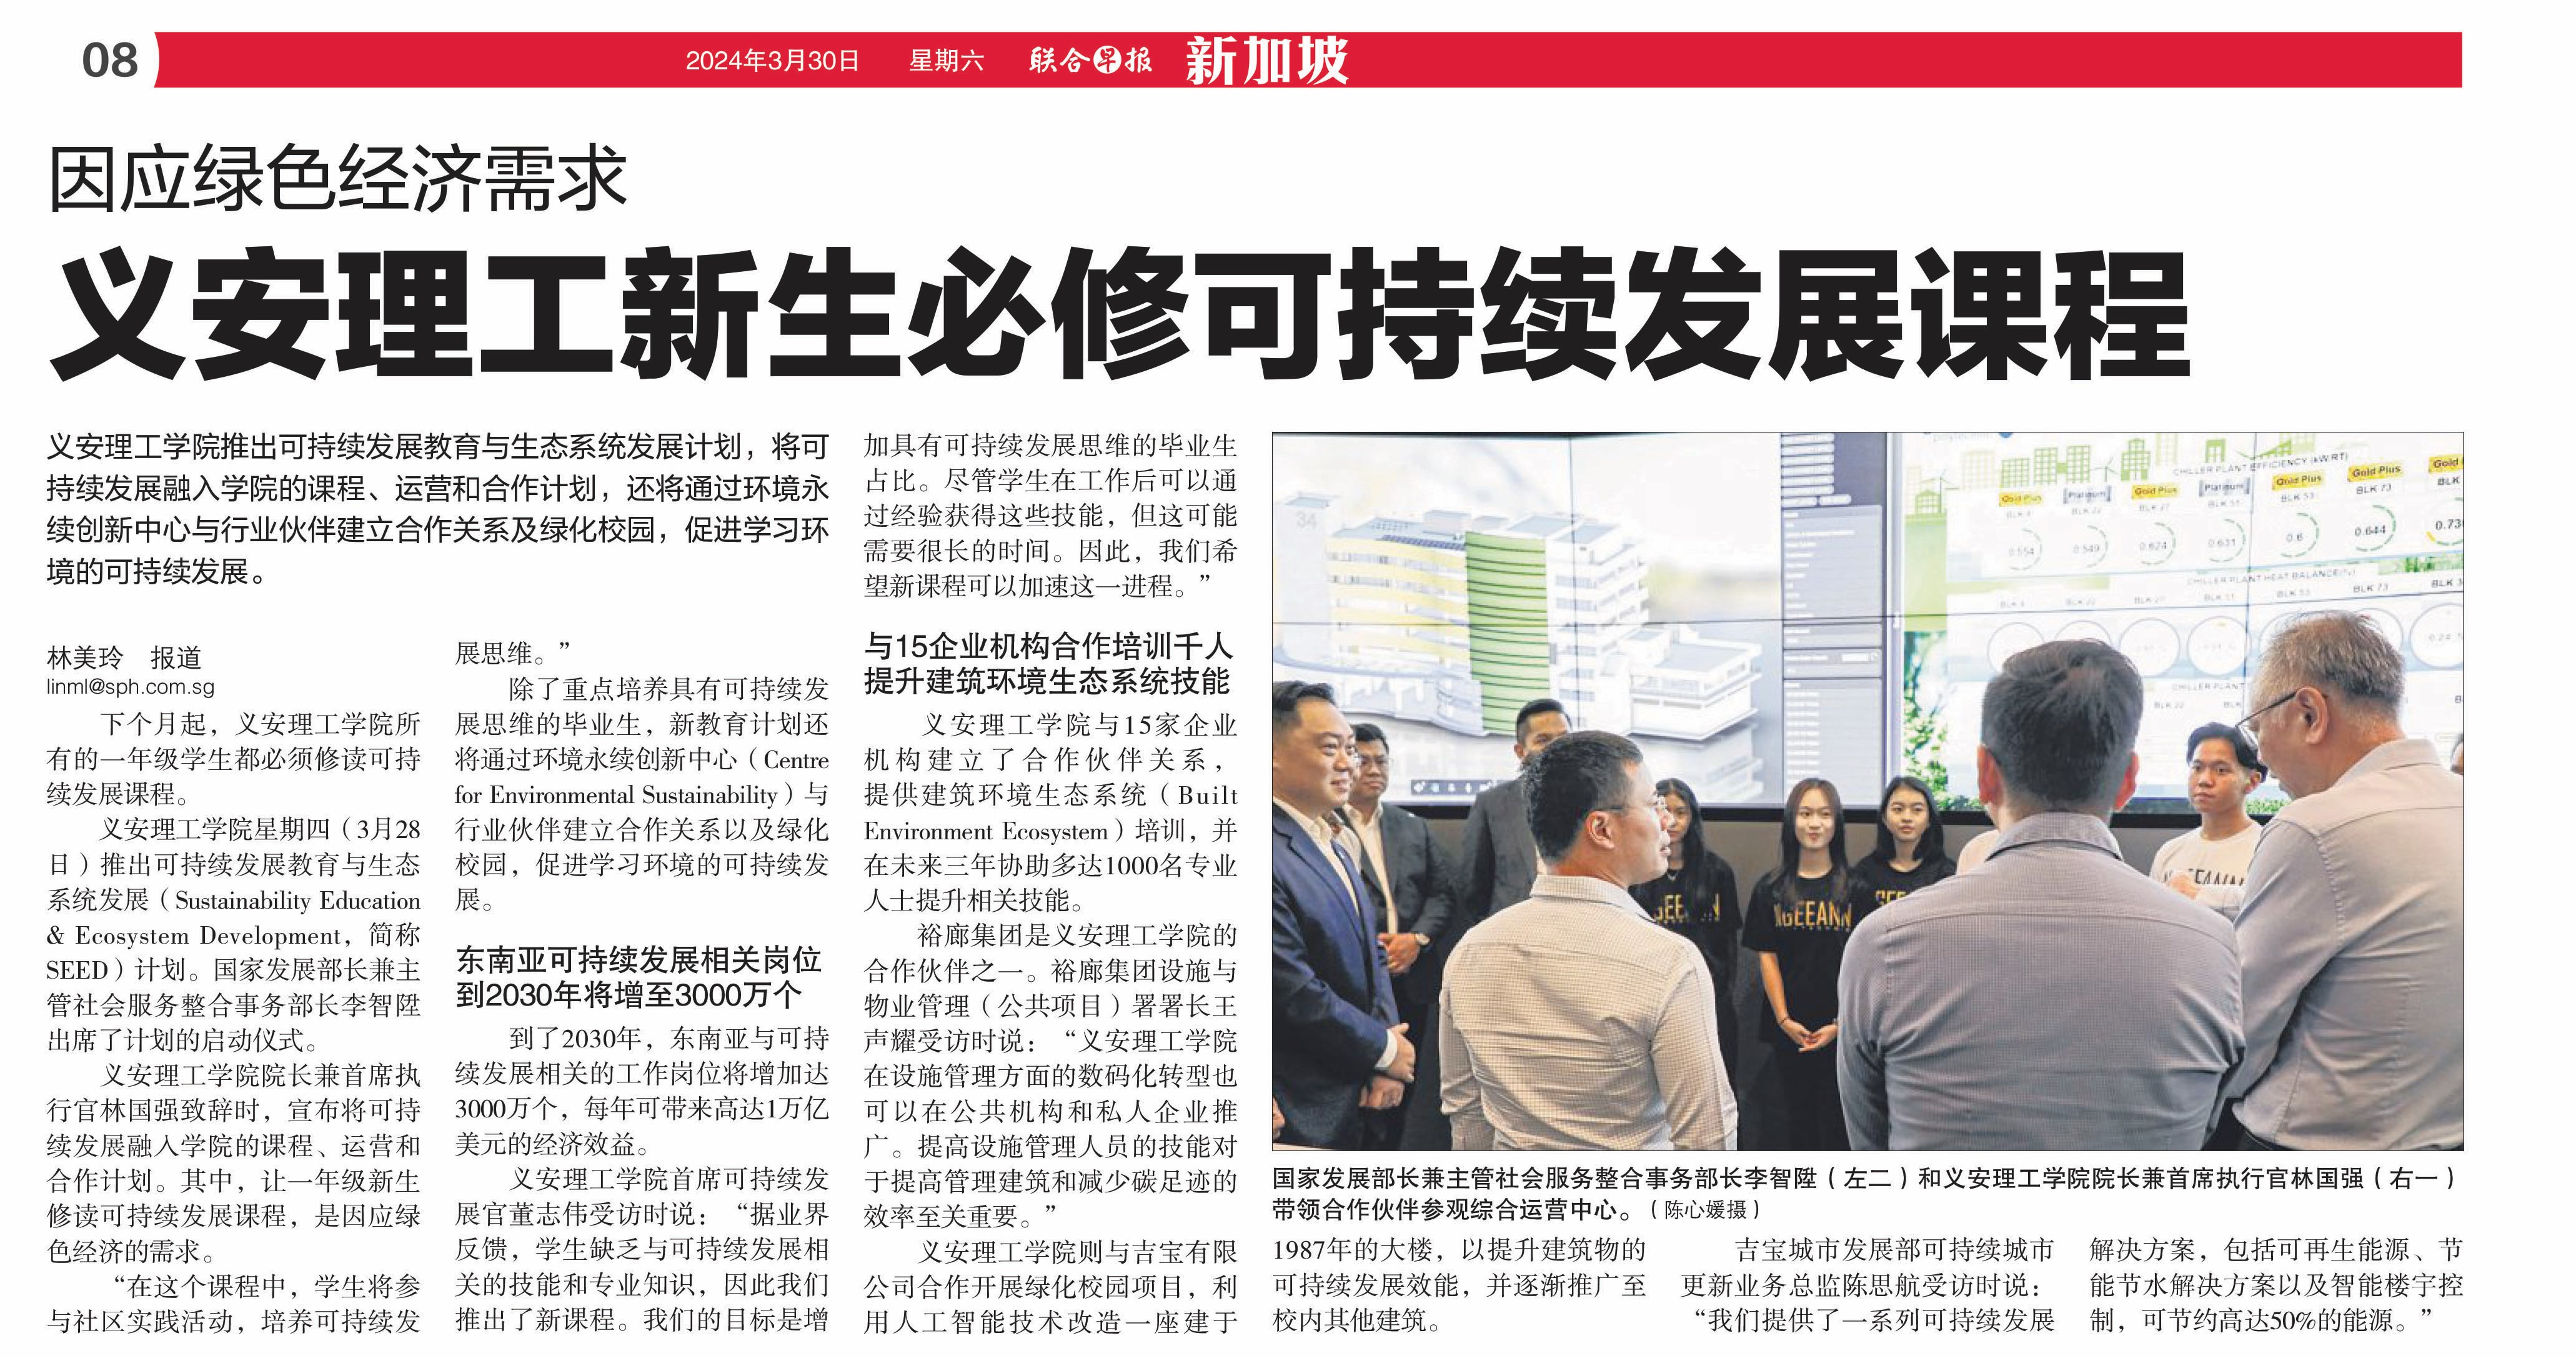 An article on Lianhe Zaobao on NP's SEED initiative